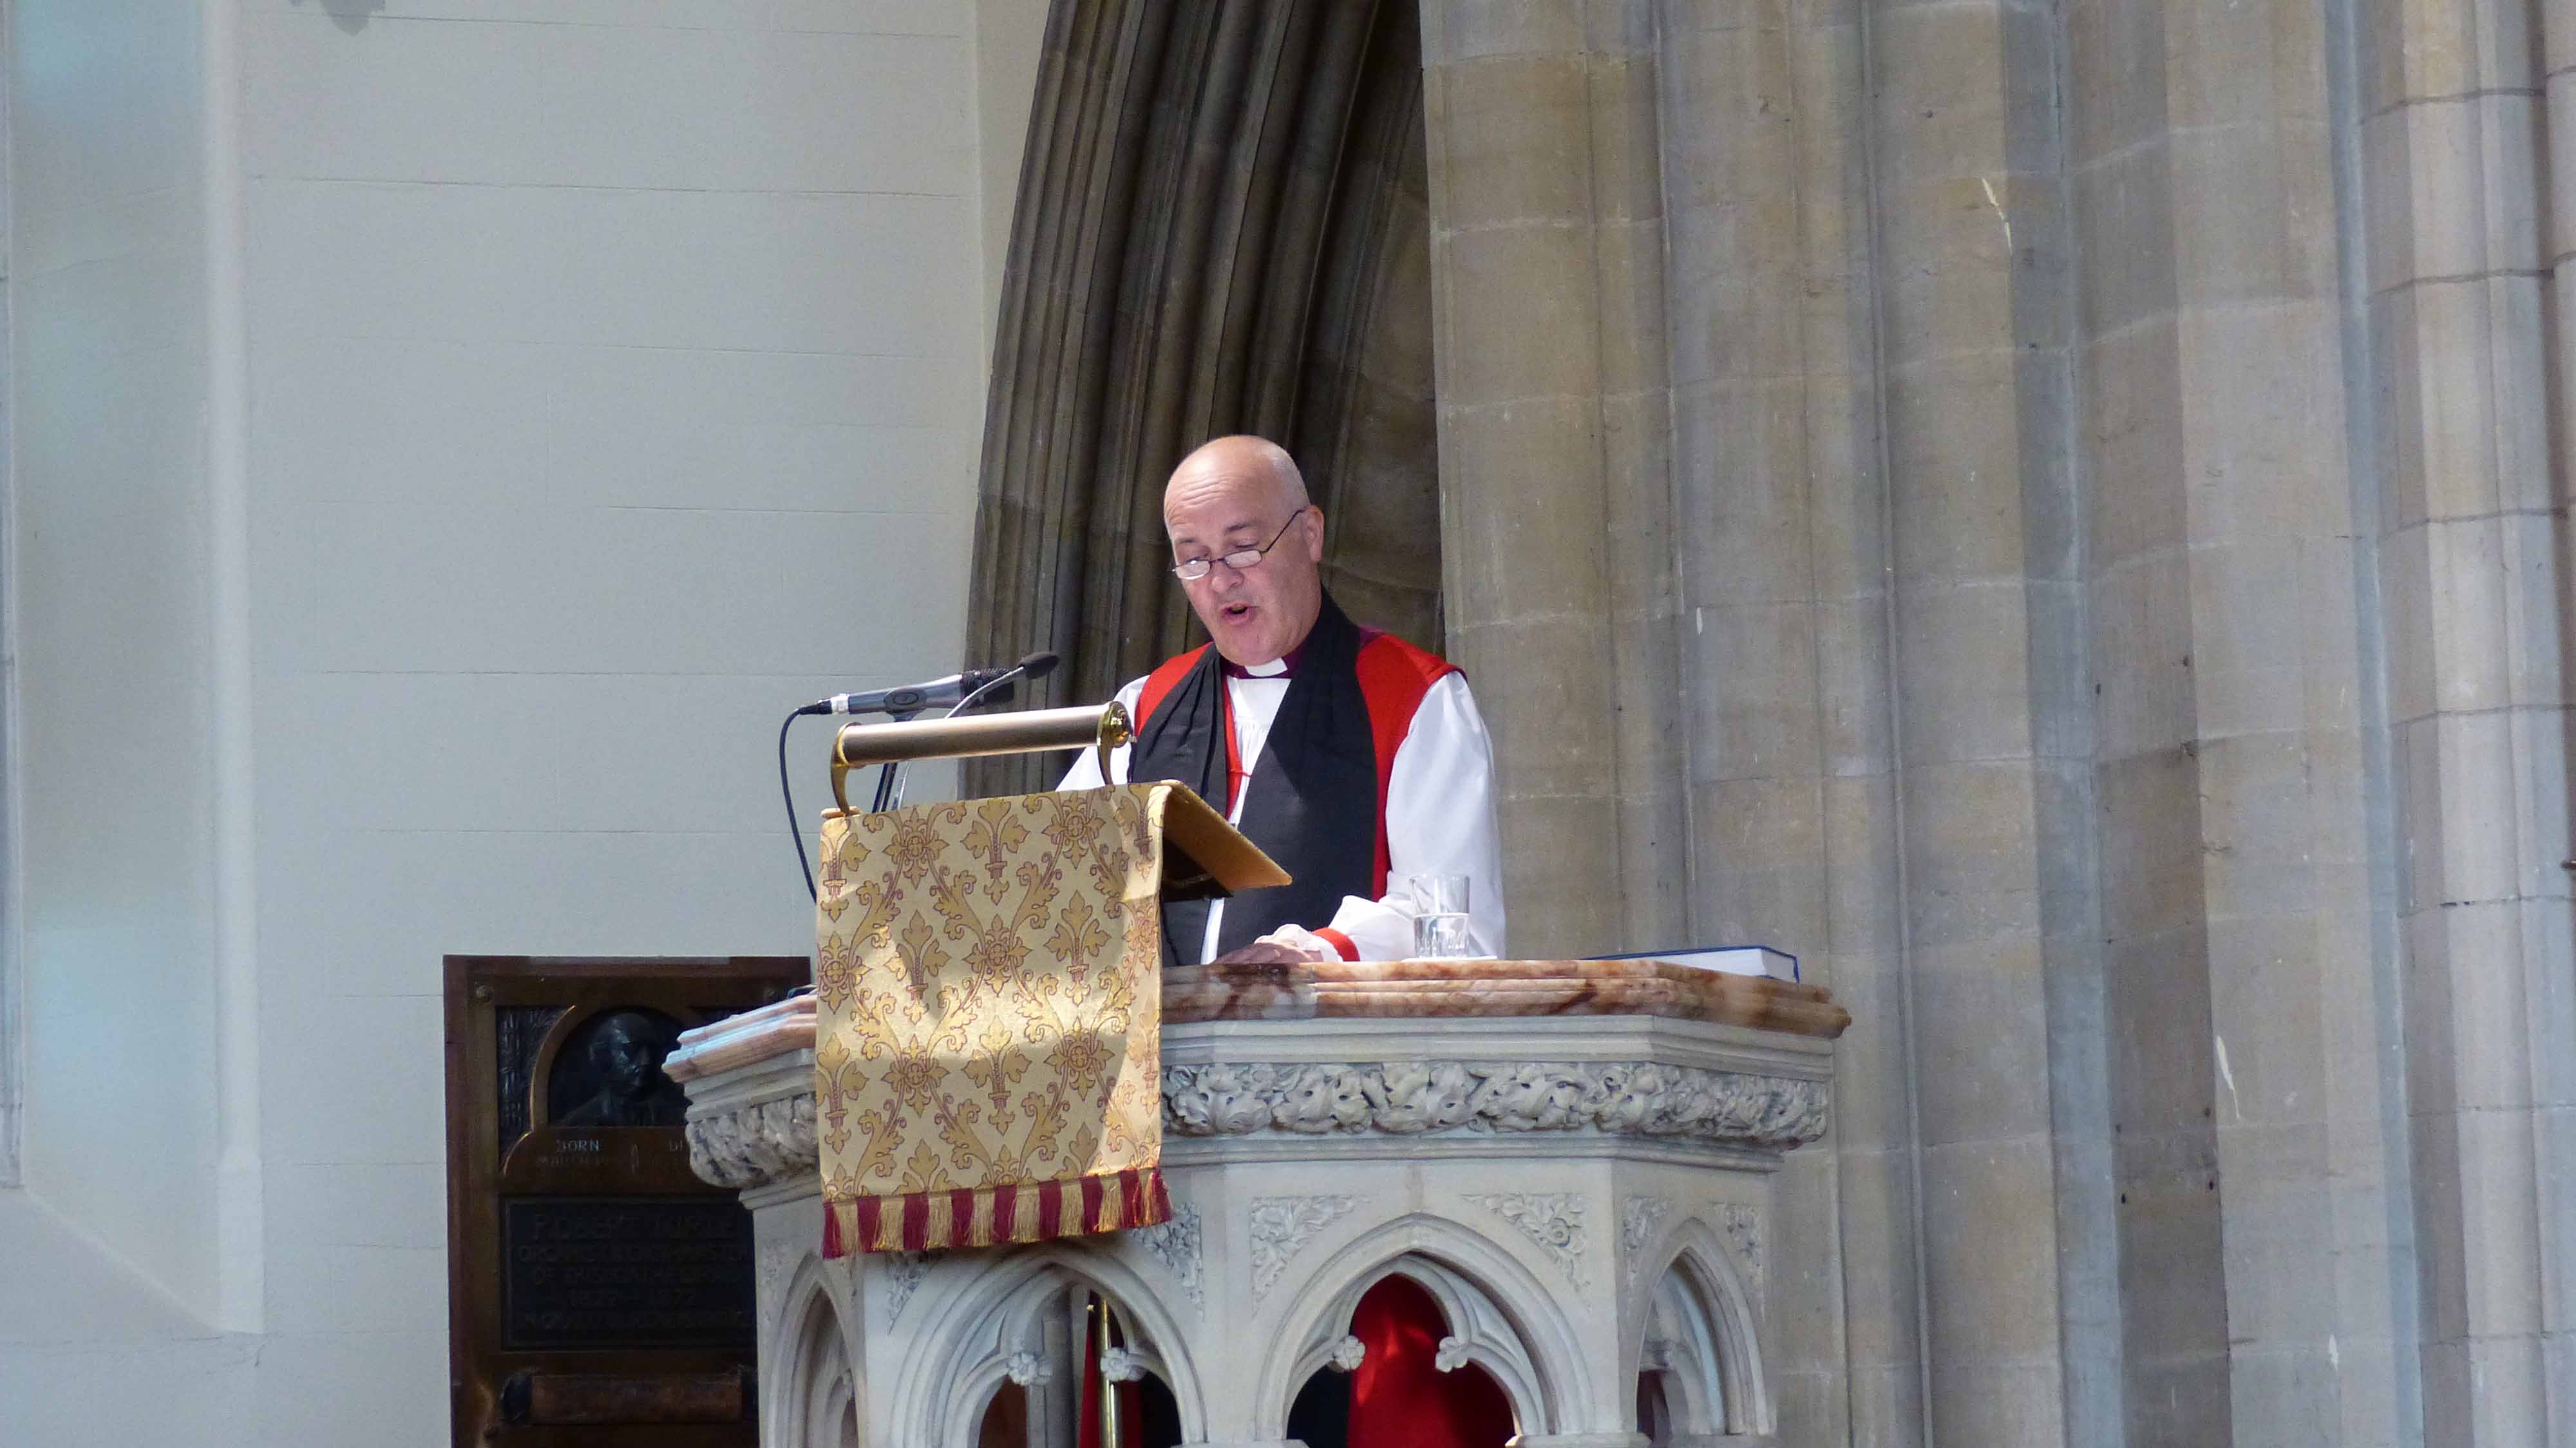 Bishop Stephen Cottrell preaching in St Patrick's Cathedral, Armagh, at the 750th Anniversary service.